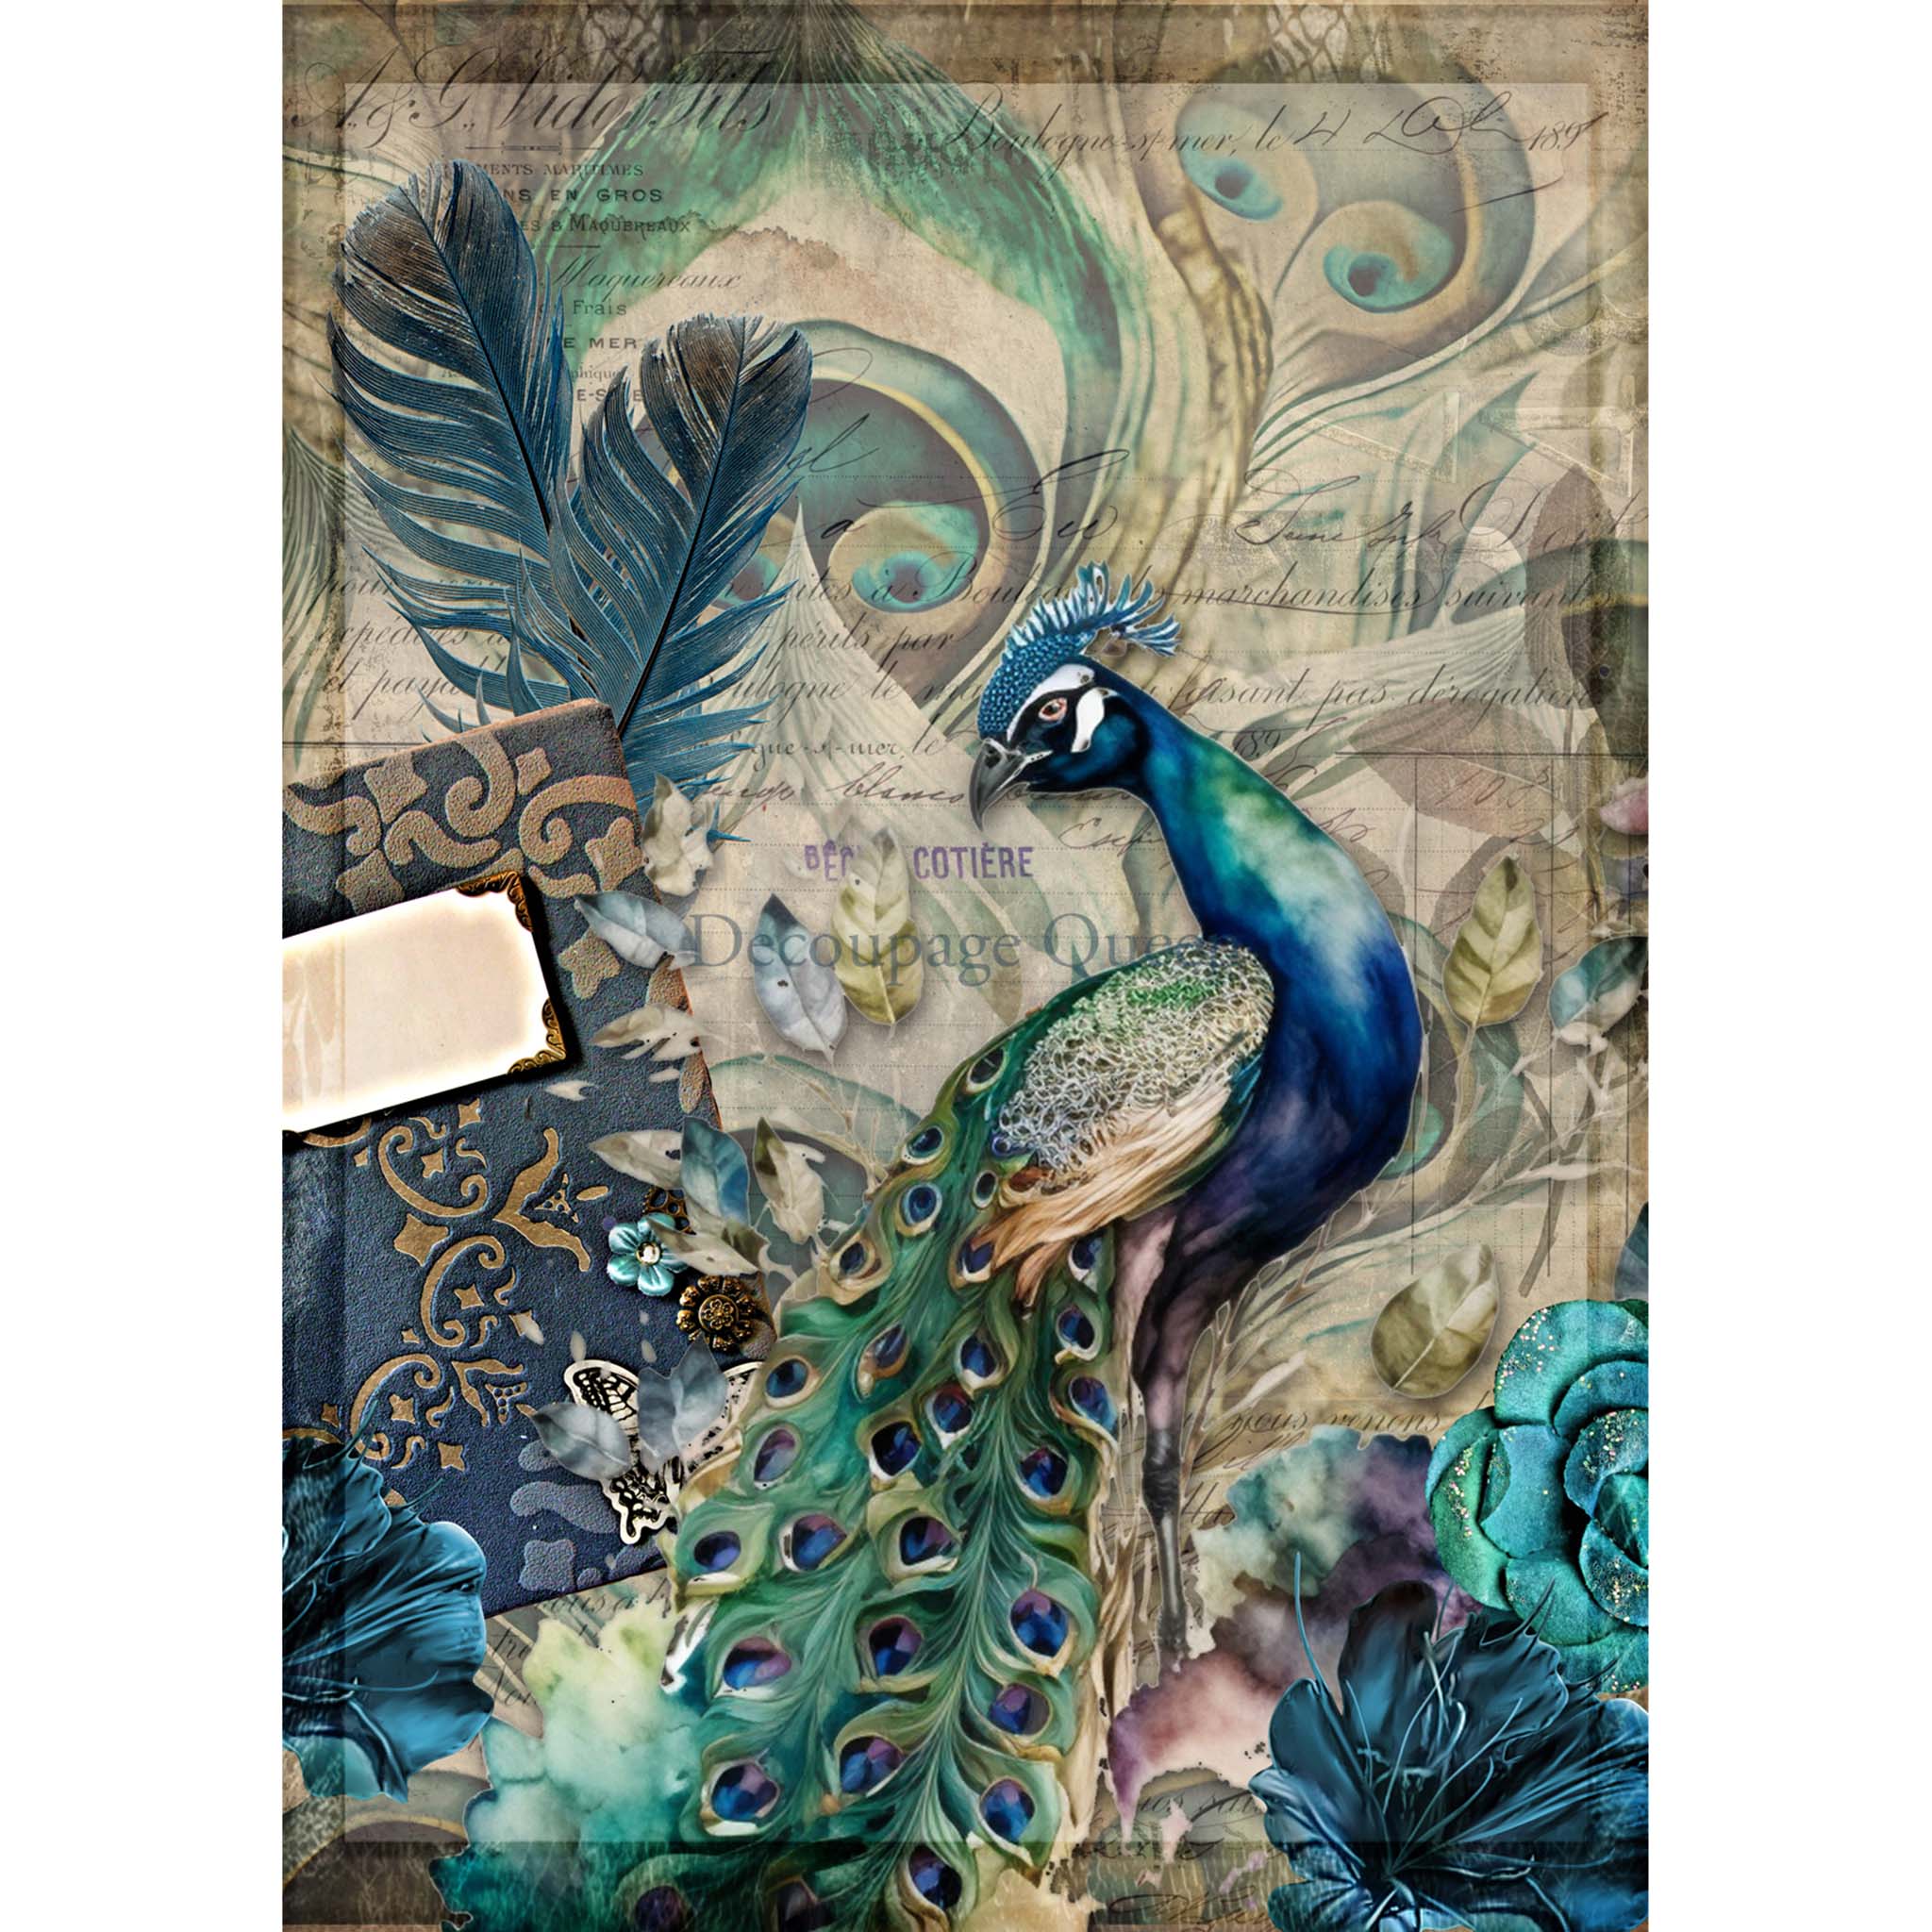 A1 rice paper design that features a vintage document adorned with a majestic peacock and delicate florals. White borders are on the sides.